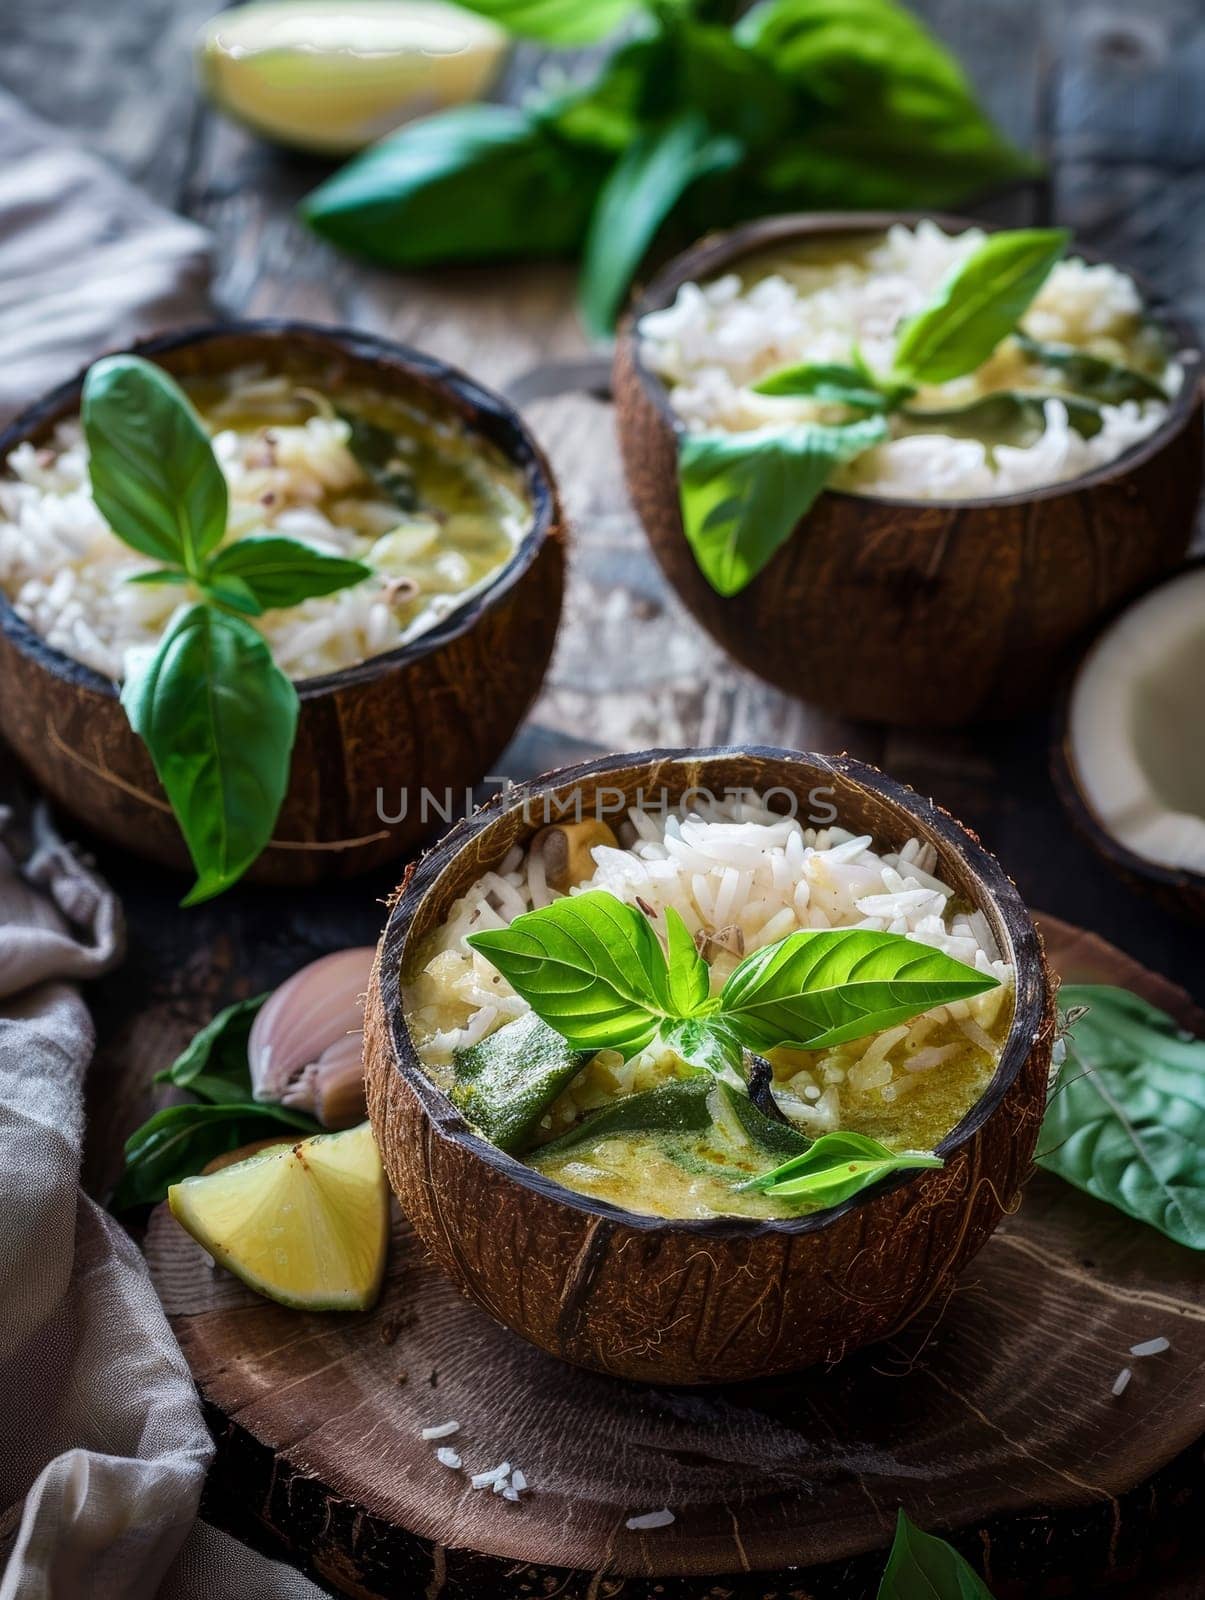 Authentic Thai green curry, served in a hollowed-out coconut shell alongside fluffy jasmine rice and fresh basil leaves - a fragrant, spicy, and creamy representation of traditional Thai culinary. by sfinks